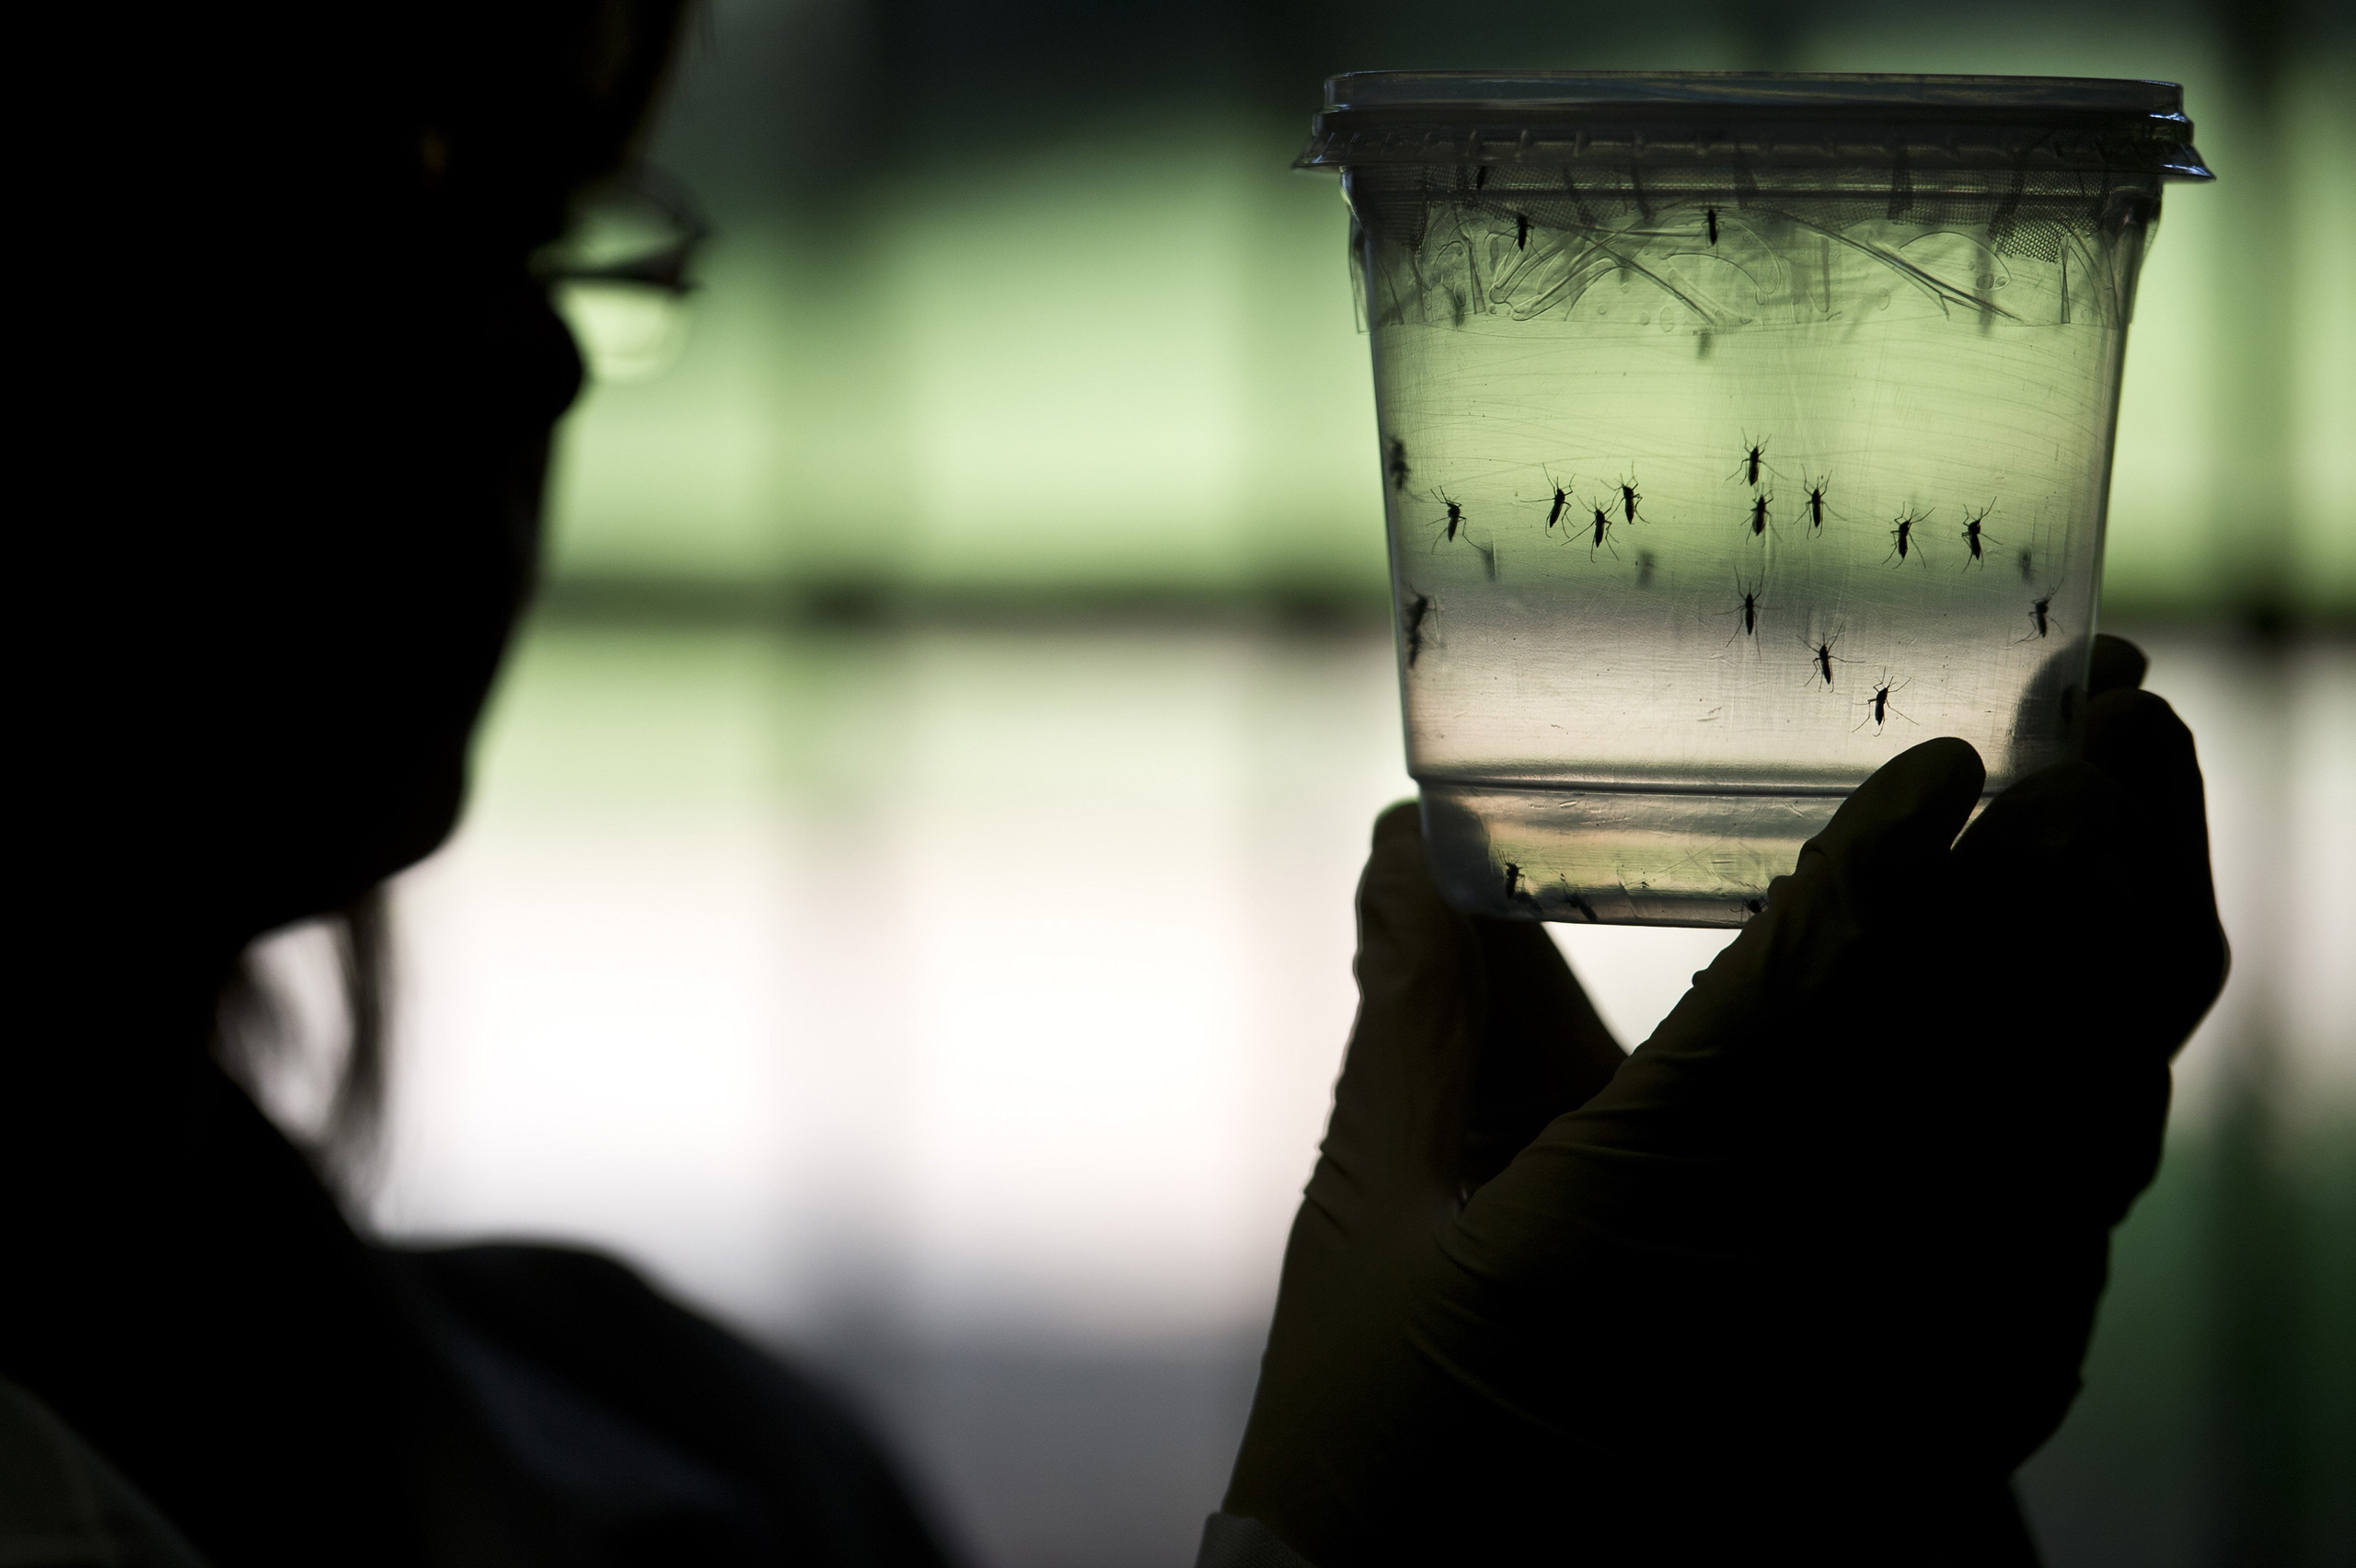 A researcher looks at Aedes aegypti mosquitoes kept in a container at a lab of the Institute of Biomedical Sciences of the Sao Paulo University, on January 8, 2016 in Sao Paulo, Brazil. Researchers at the Pasteur Institute in Dakar, Senegal are  in Brazil to train local researchers to combat Zika virus epidemic.  AFP PHOTO / NELSON ALMEIDANELSON ALMEIDA/AFP/Getty Images